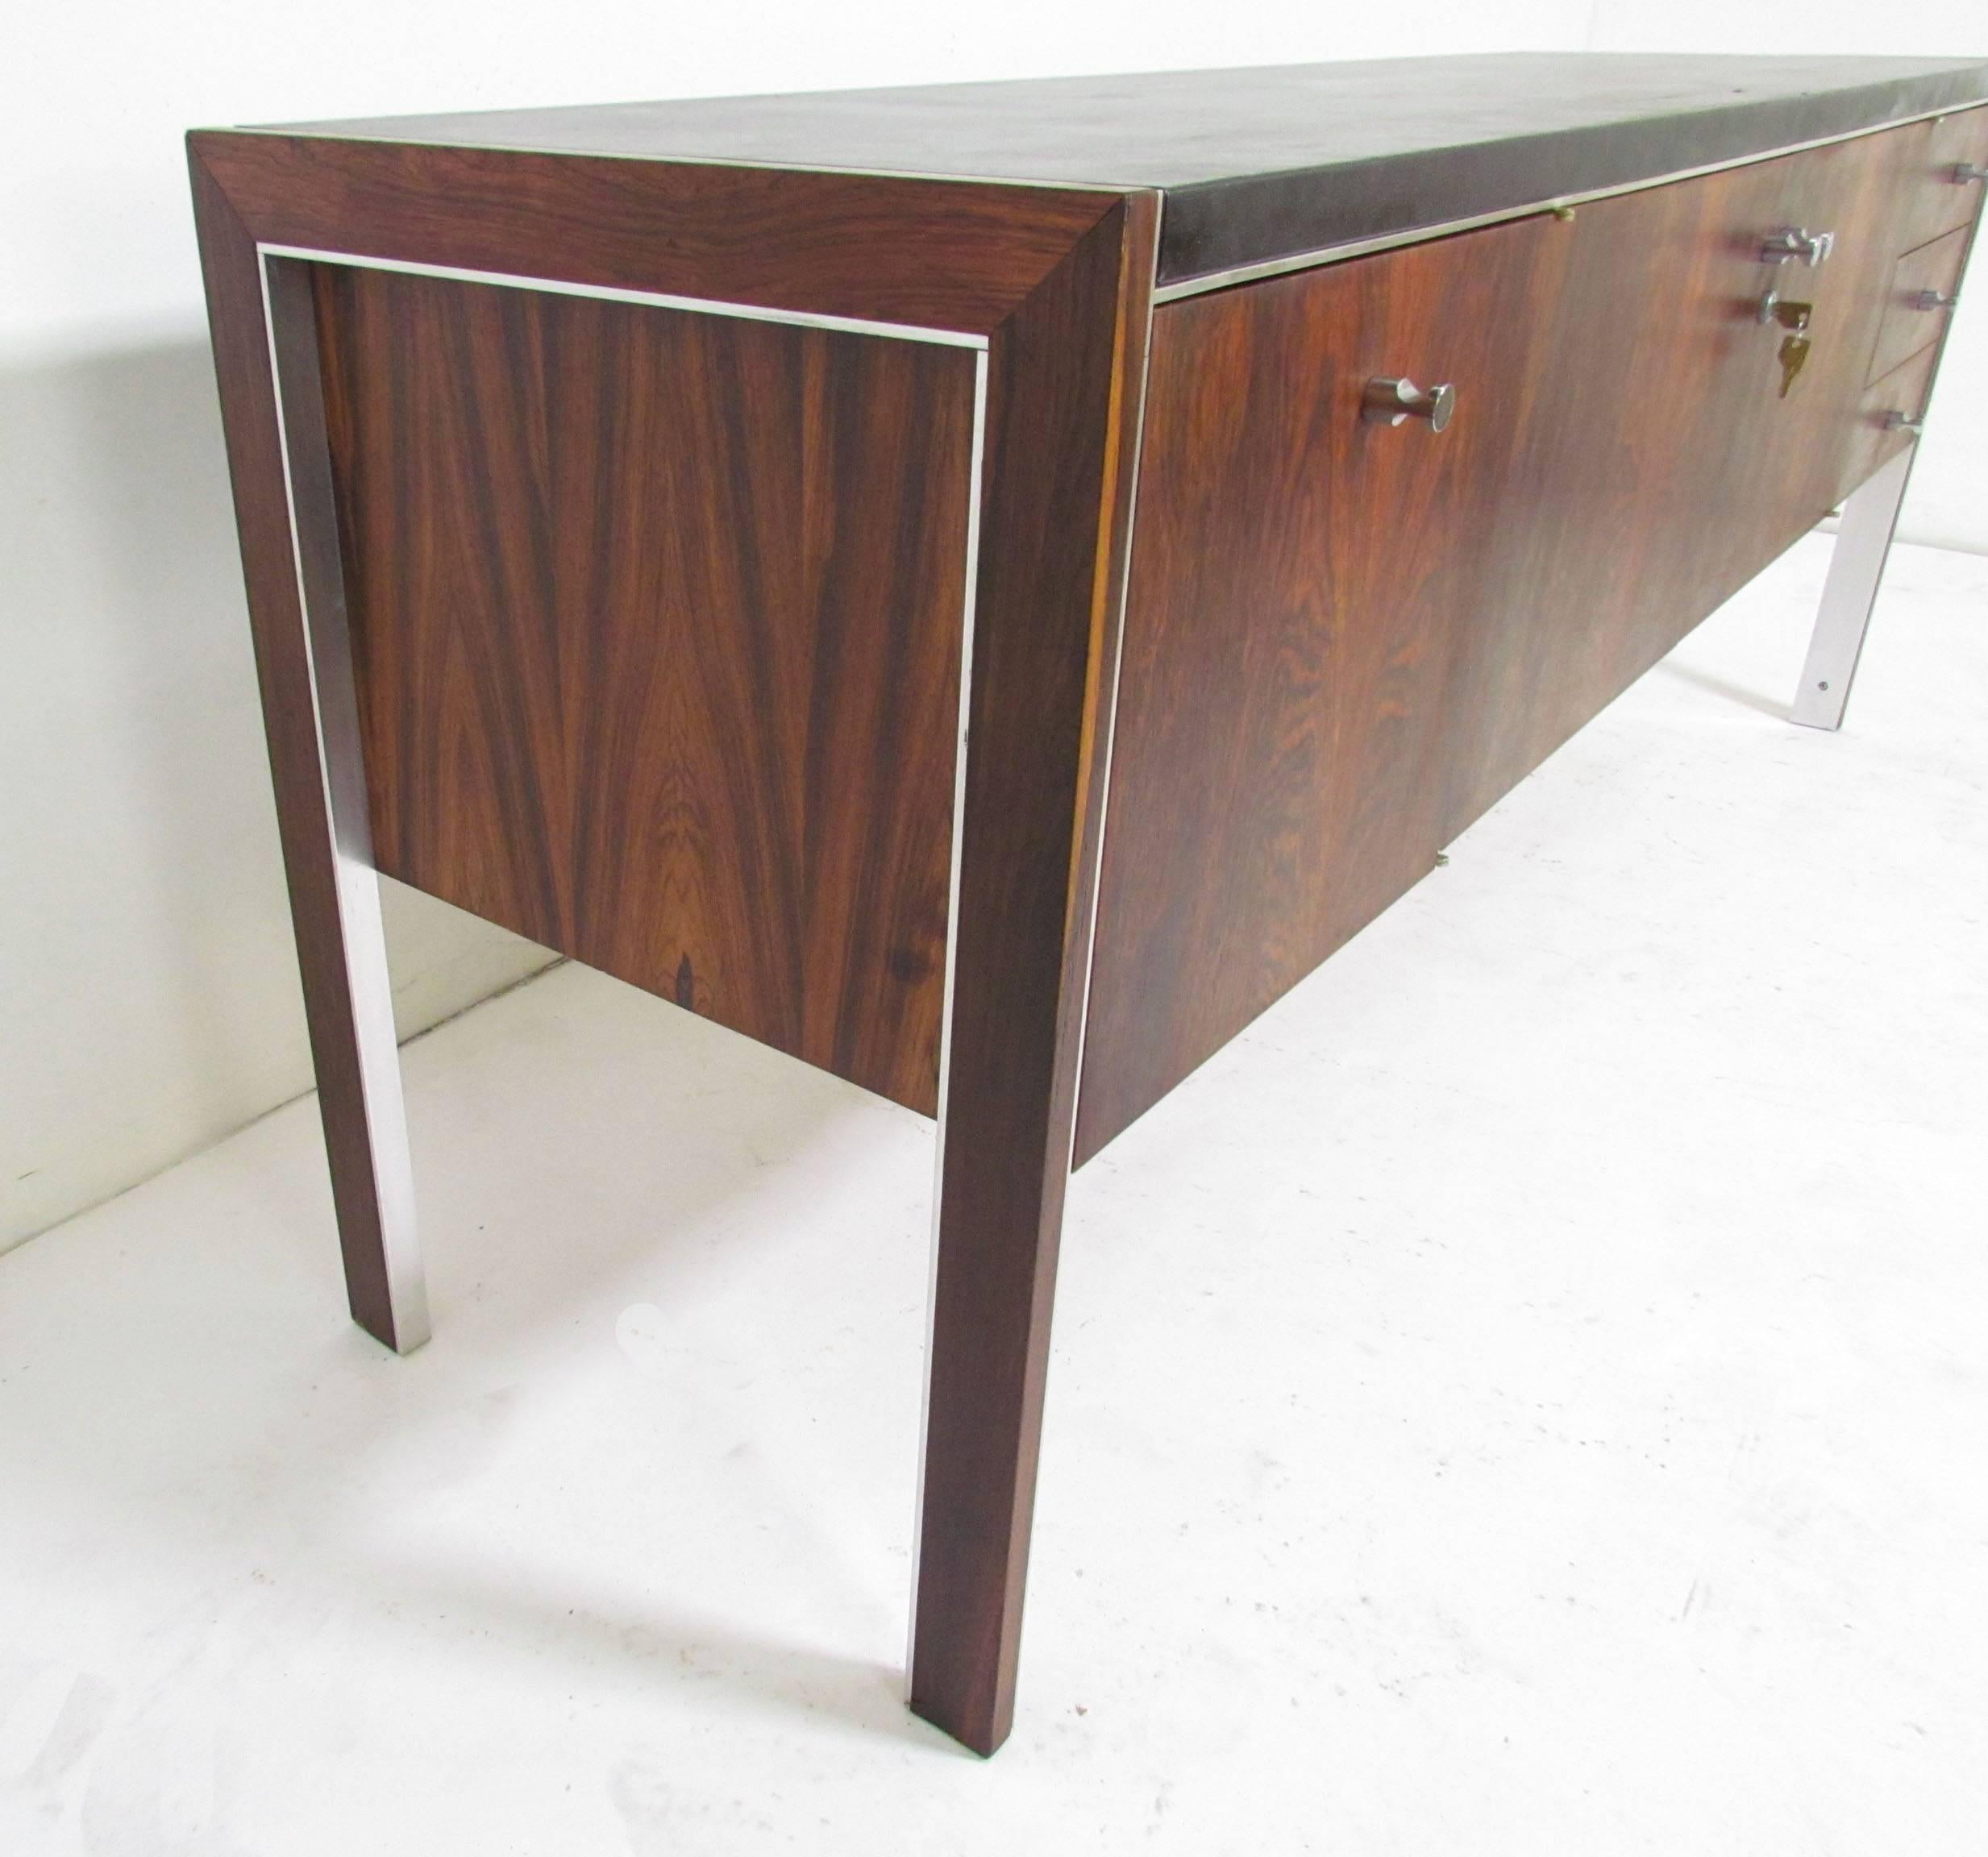 Late 20th Century Rosewood Credenza with Leather Top by Herman Miller for Biltrite, circa 1970s